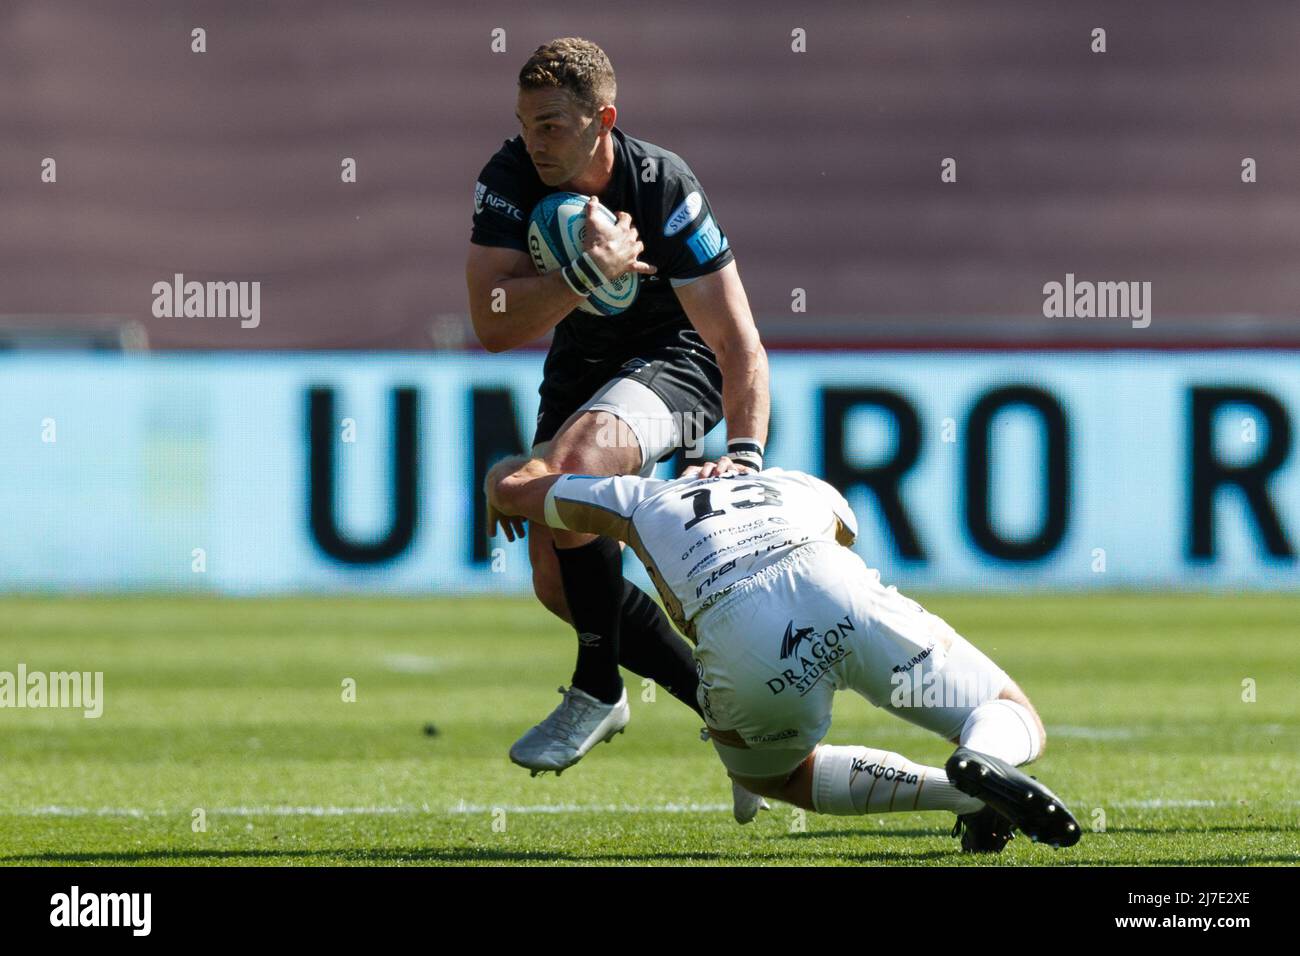 Swansea, UK. 8 May, 2022. George North of Ospreys is tackled by Adam Warren of Dragons during the Ospreys v Dragons United Rugby Championship Match. Credit: Gruffydd Thomas/Alamy Stock Photo